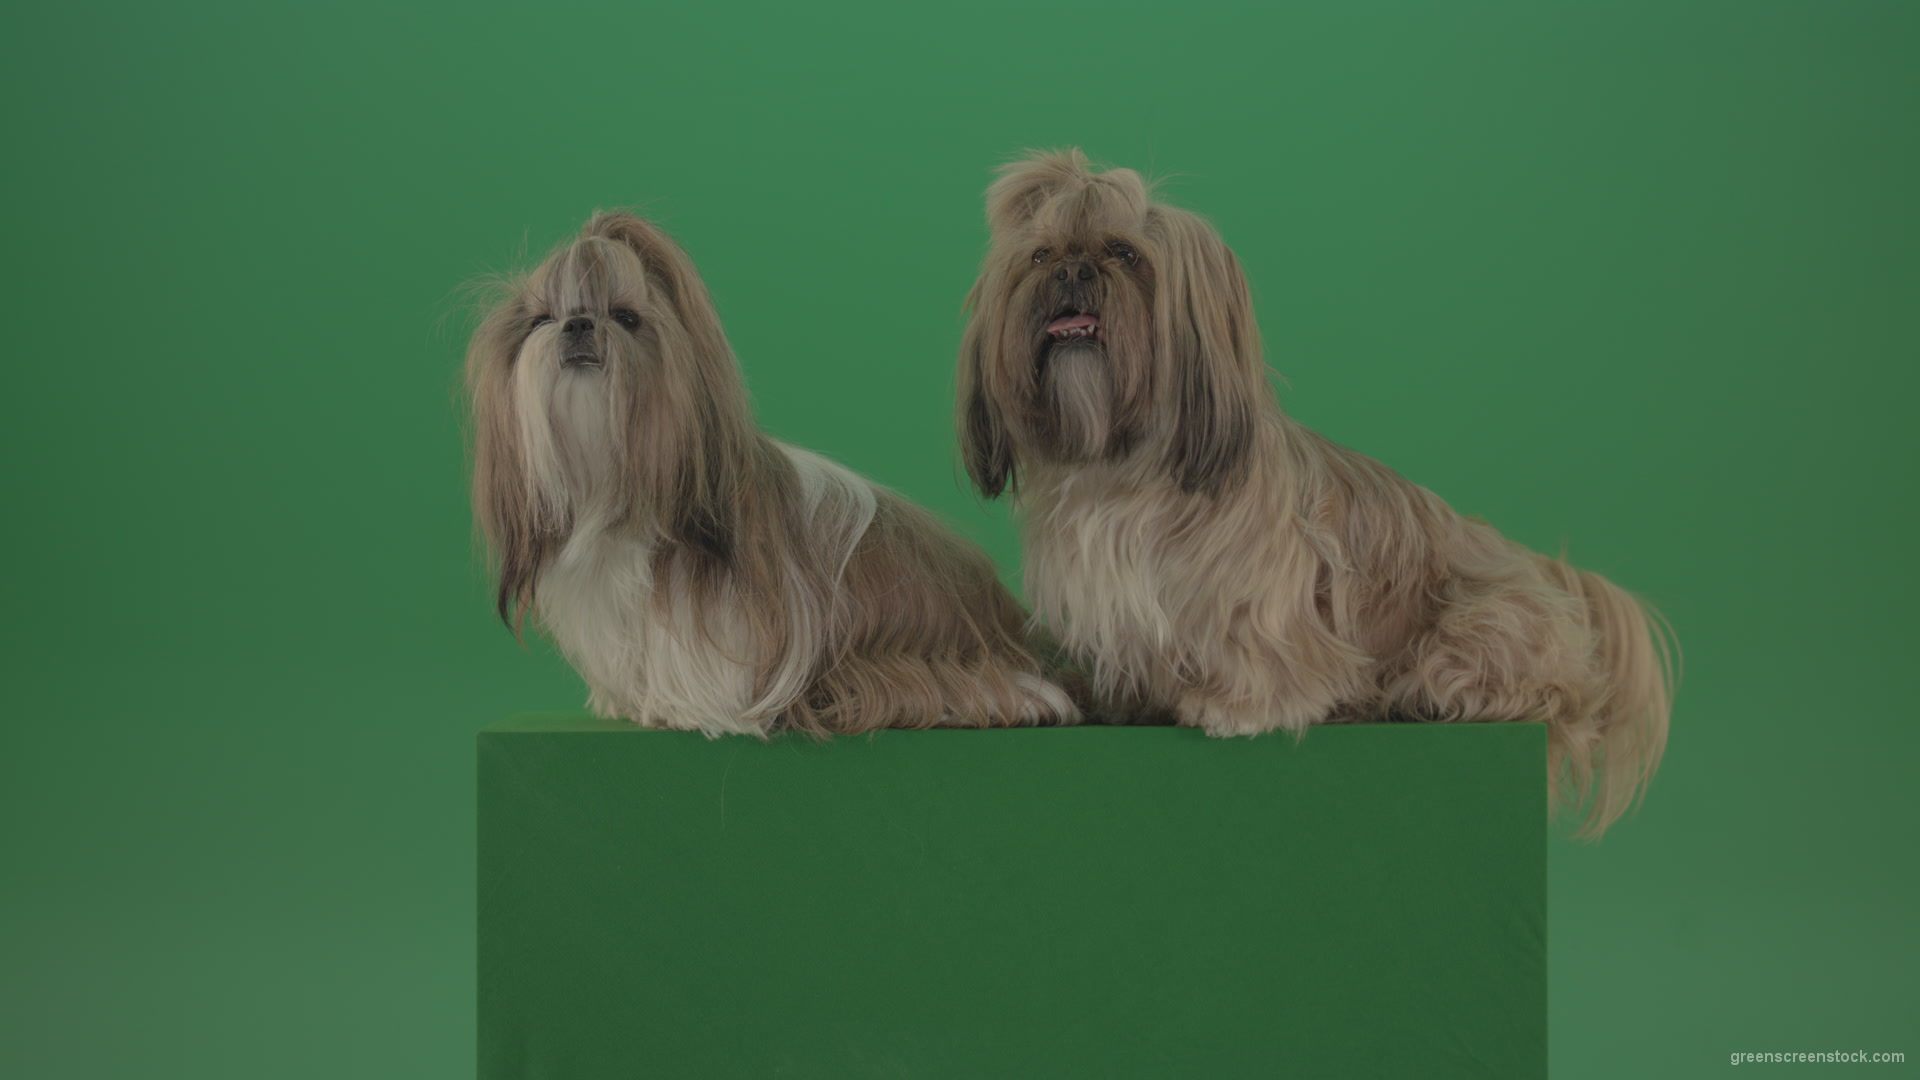 Awards-winners-Shih-tzu-fashion-luxury-expensive-dog-in-side-view-isolated-on-green-screen_005 Green Screen Stock